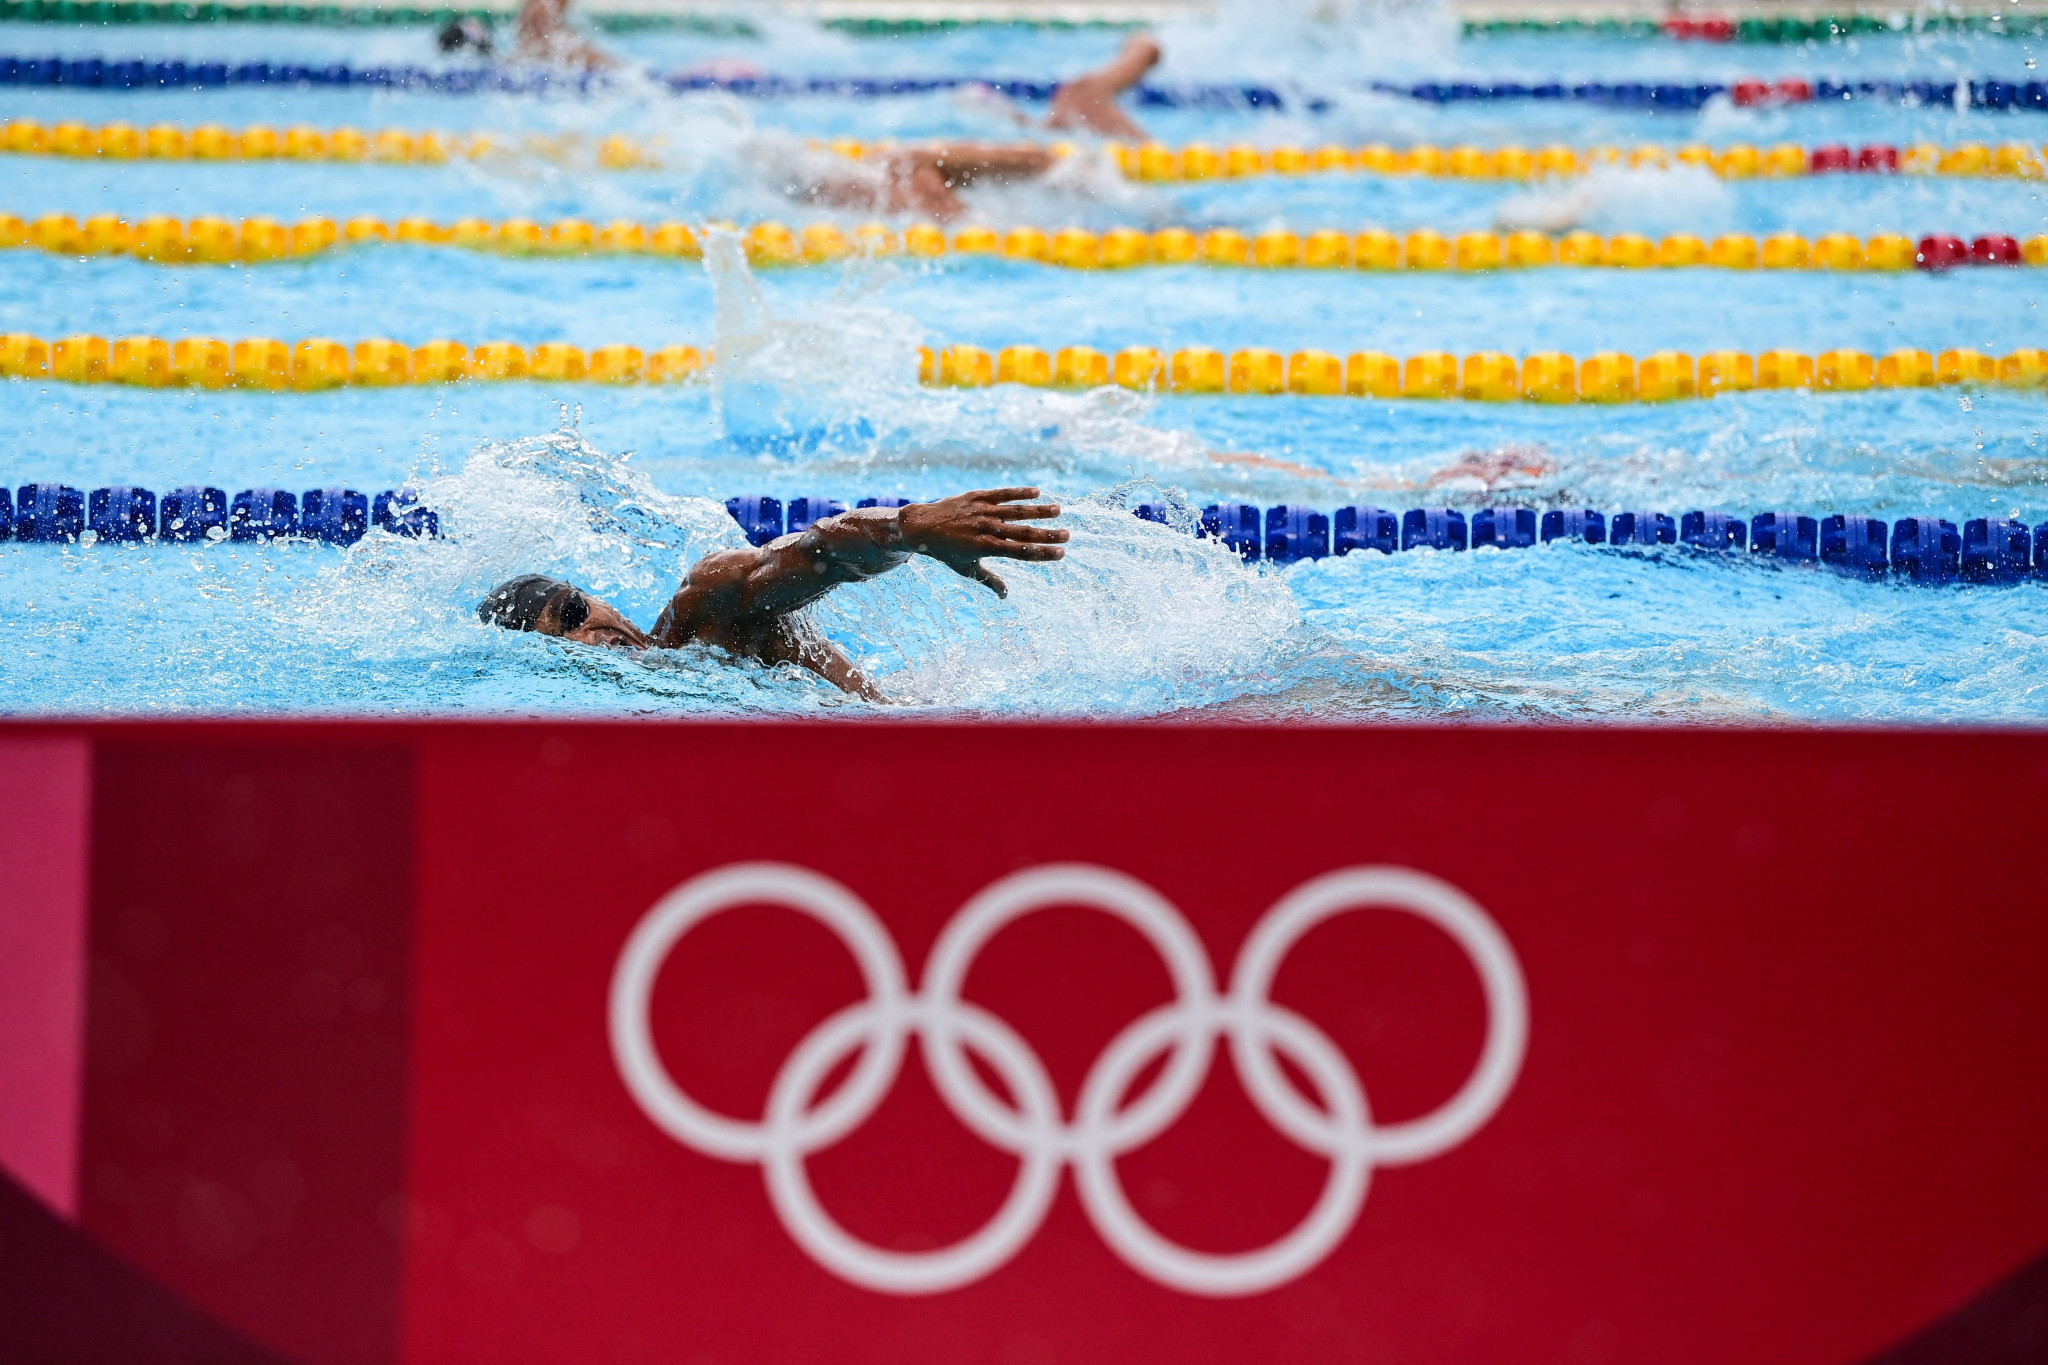 Special Olympics swimmer hit by temporary ban over misconduct claims image picture photo